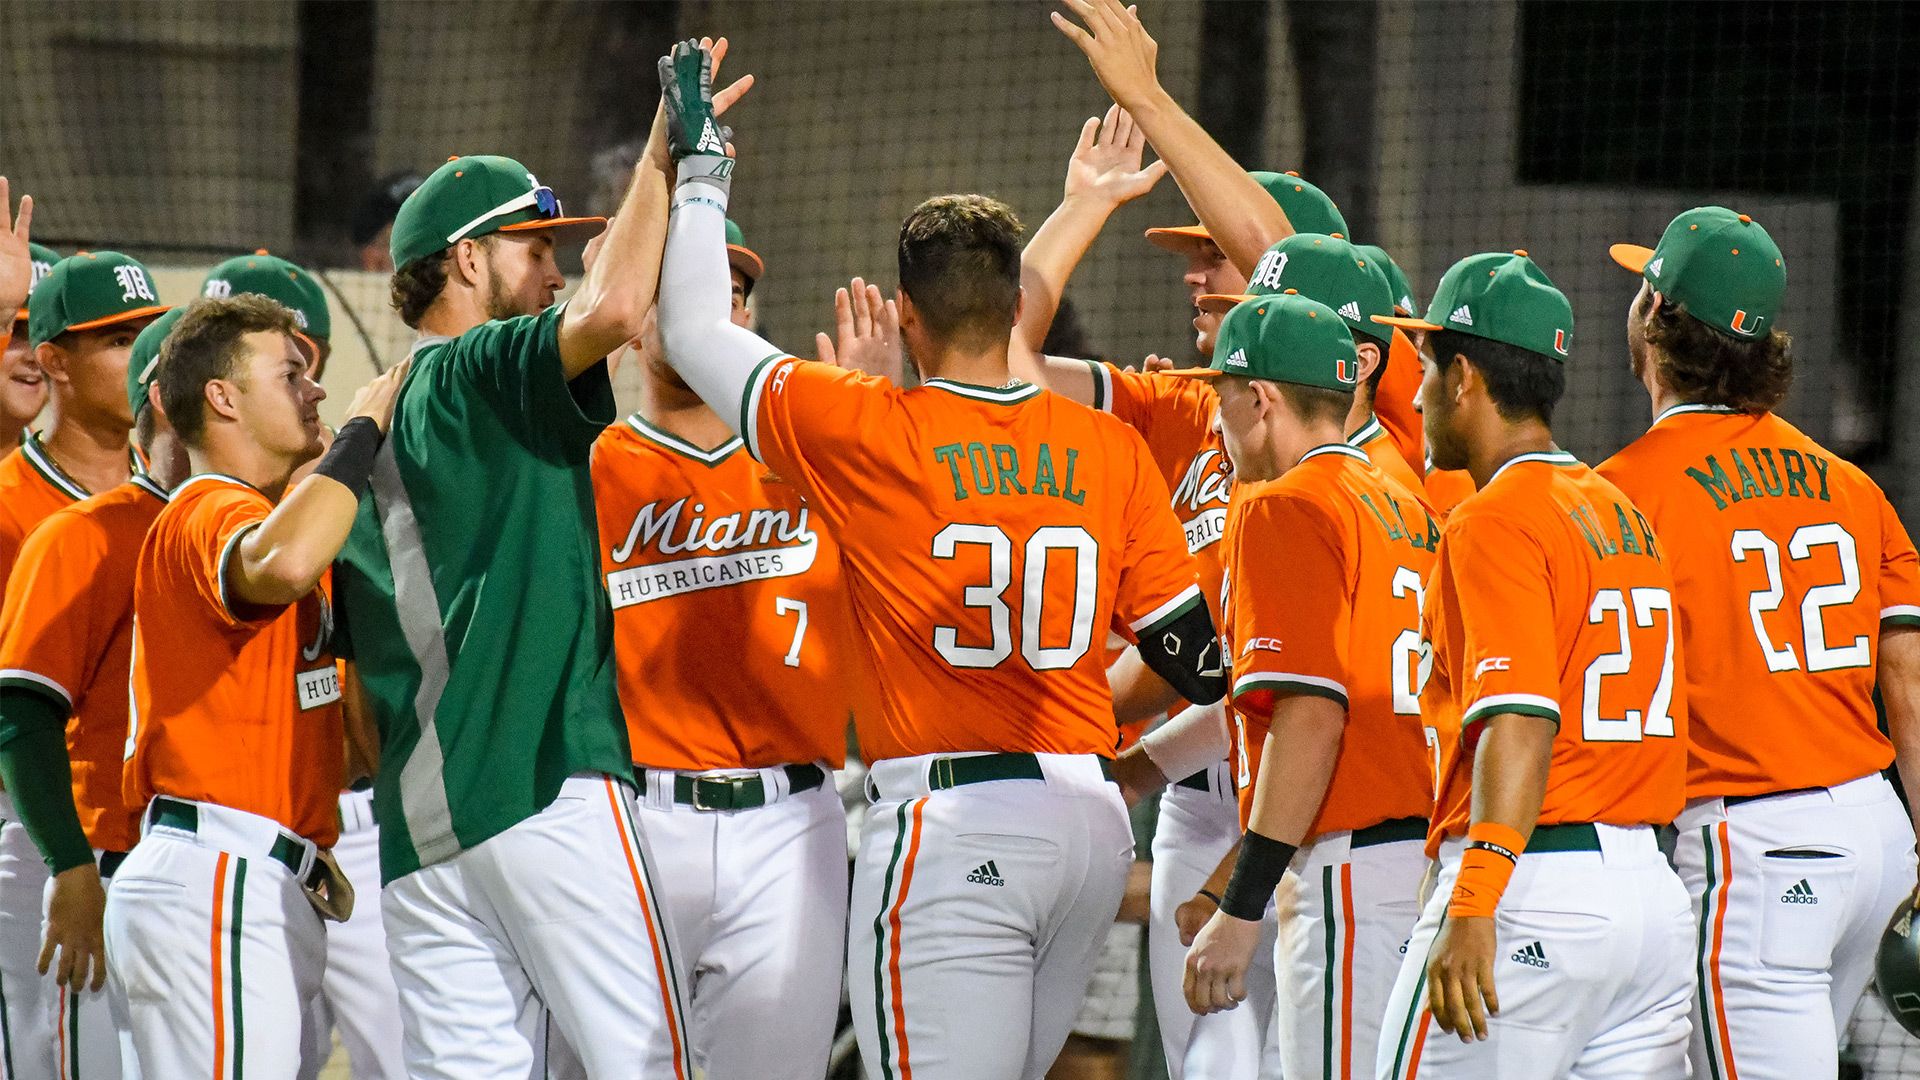 Canes Baseball Ranked in Top 15